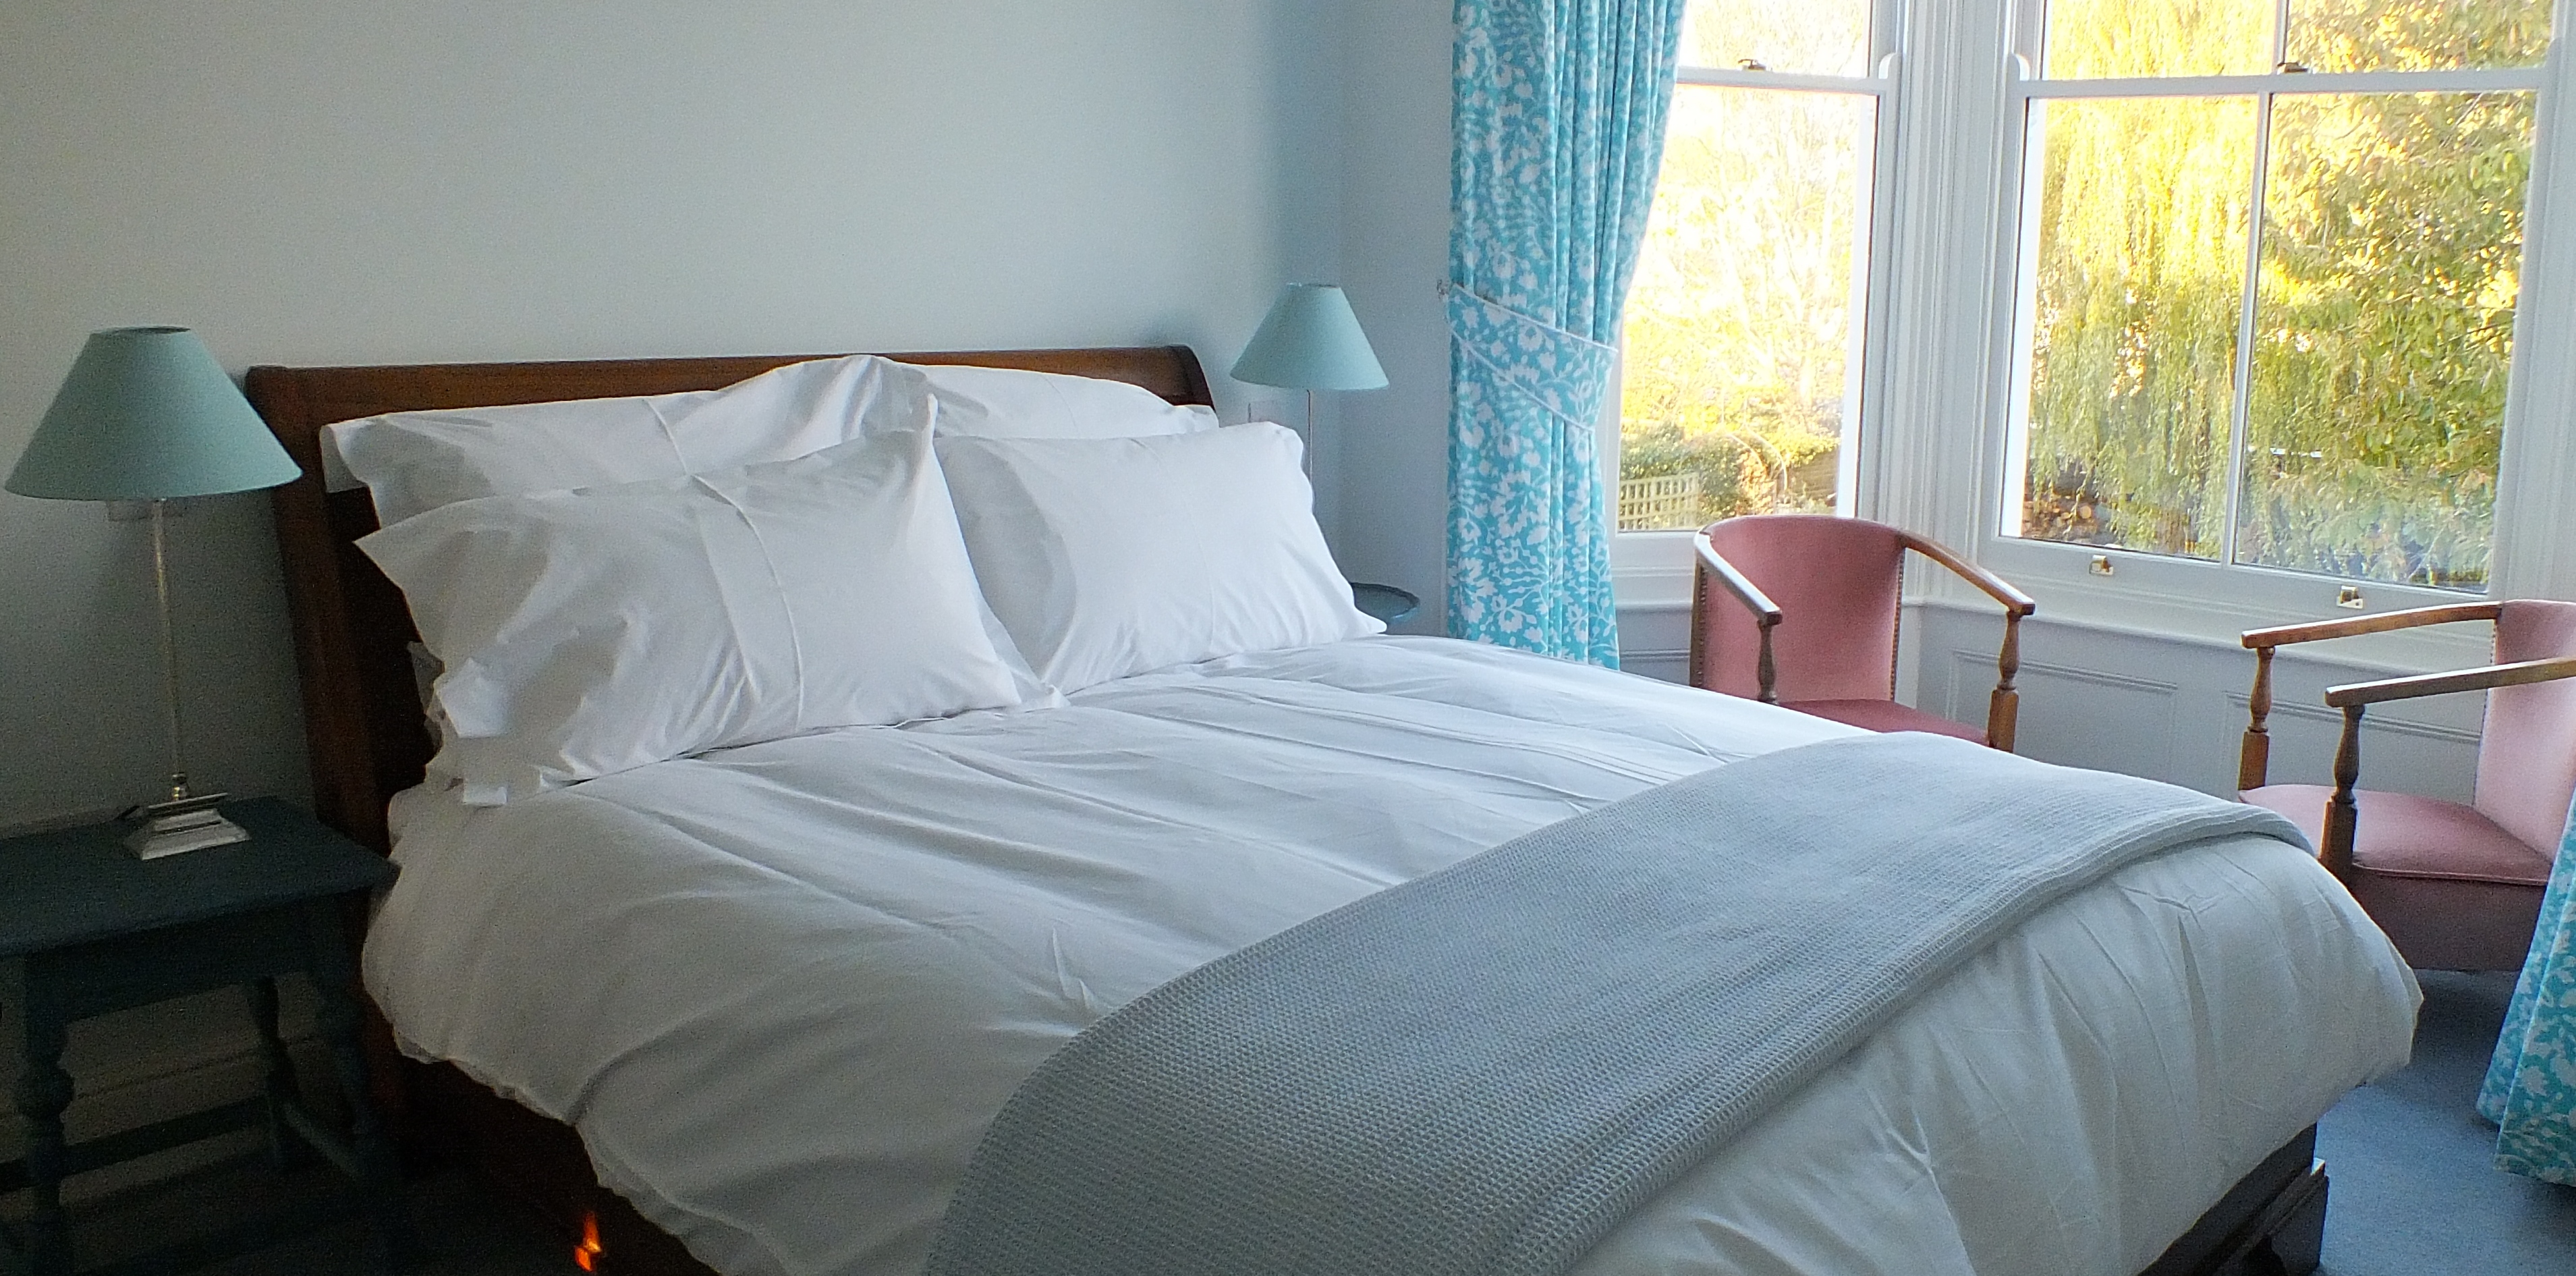 Bear's Well, Bed and Breakfast, Double Room, Deal, Kent